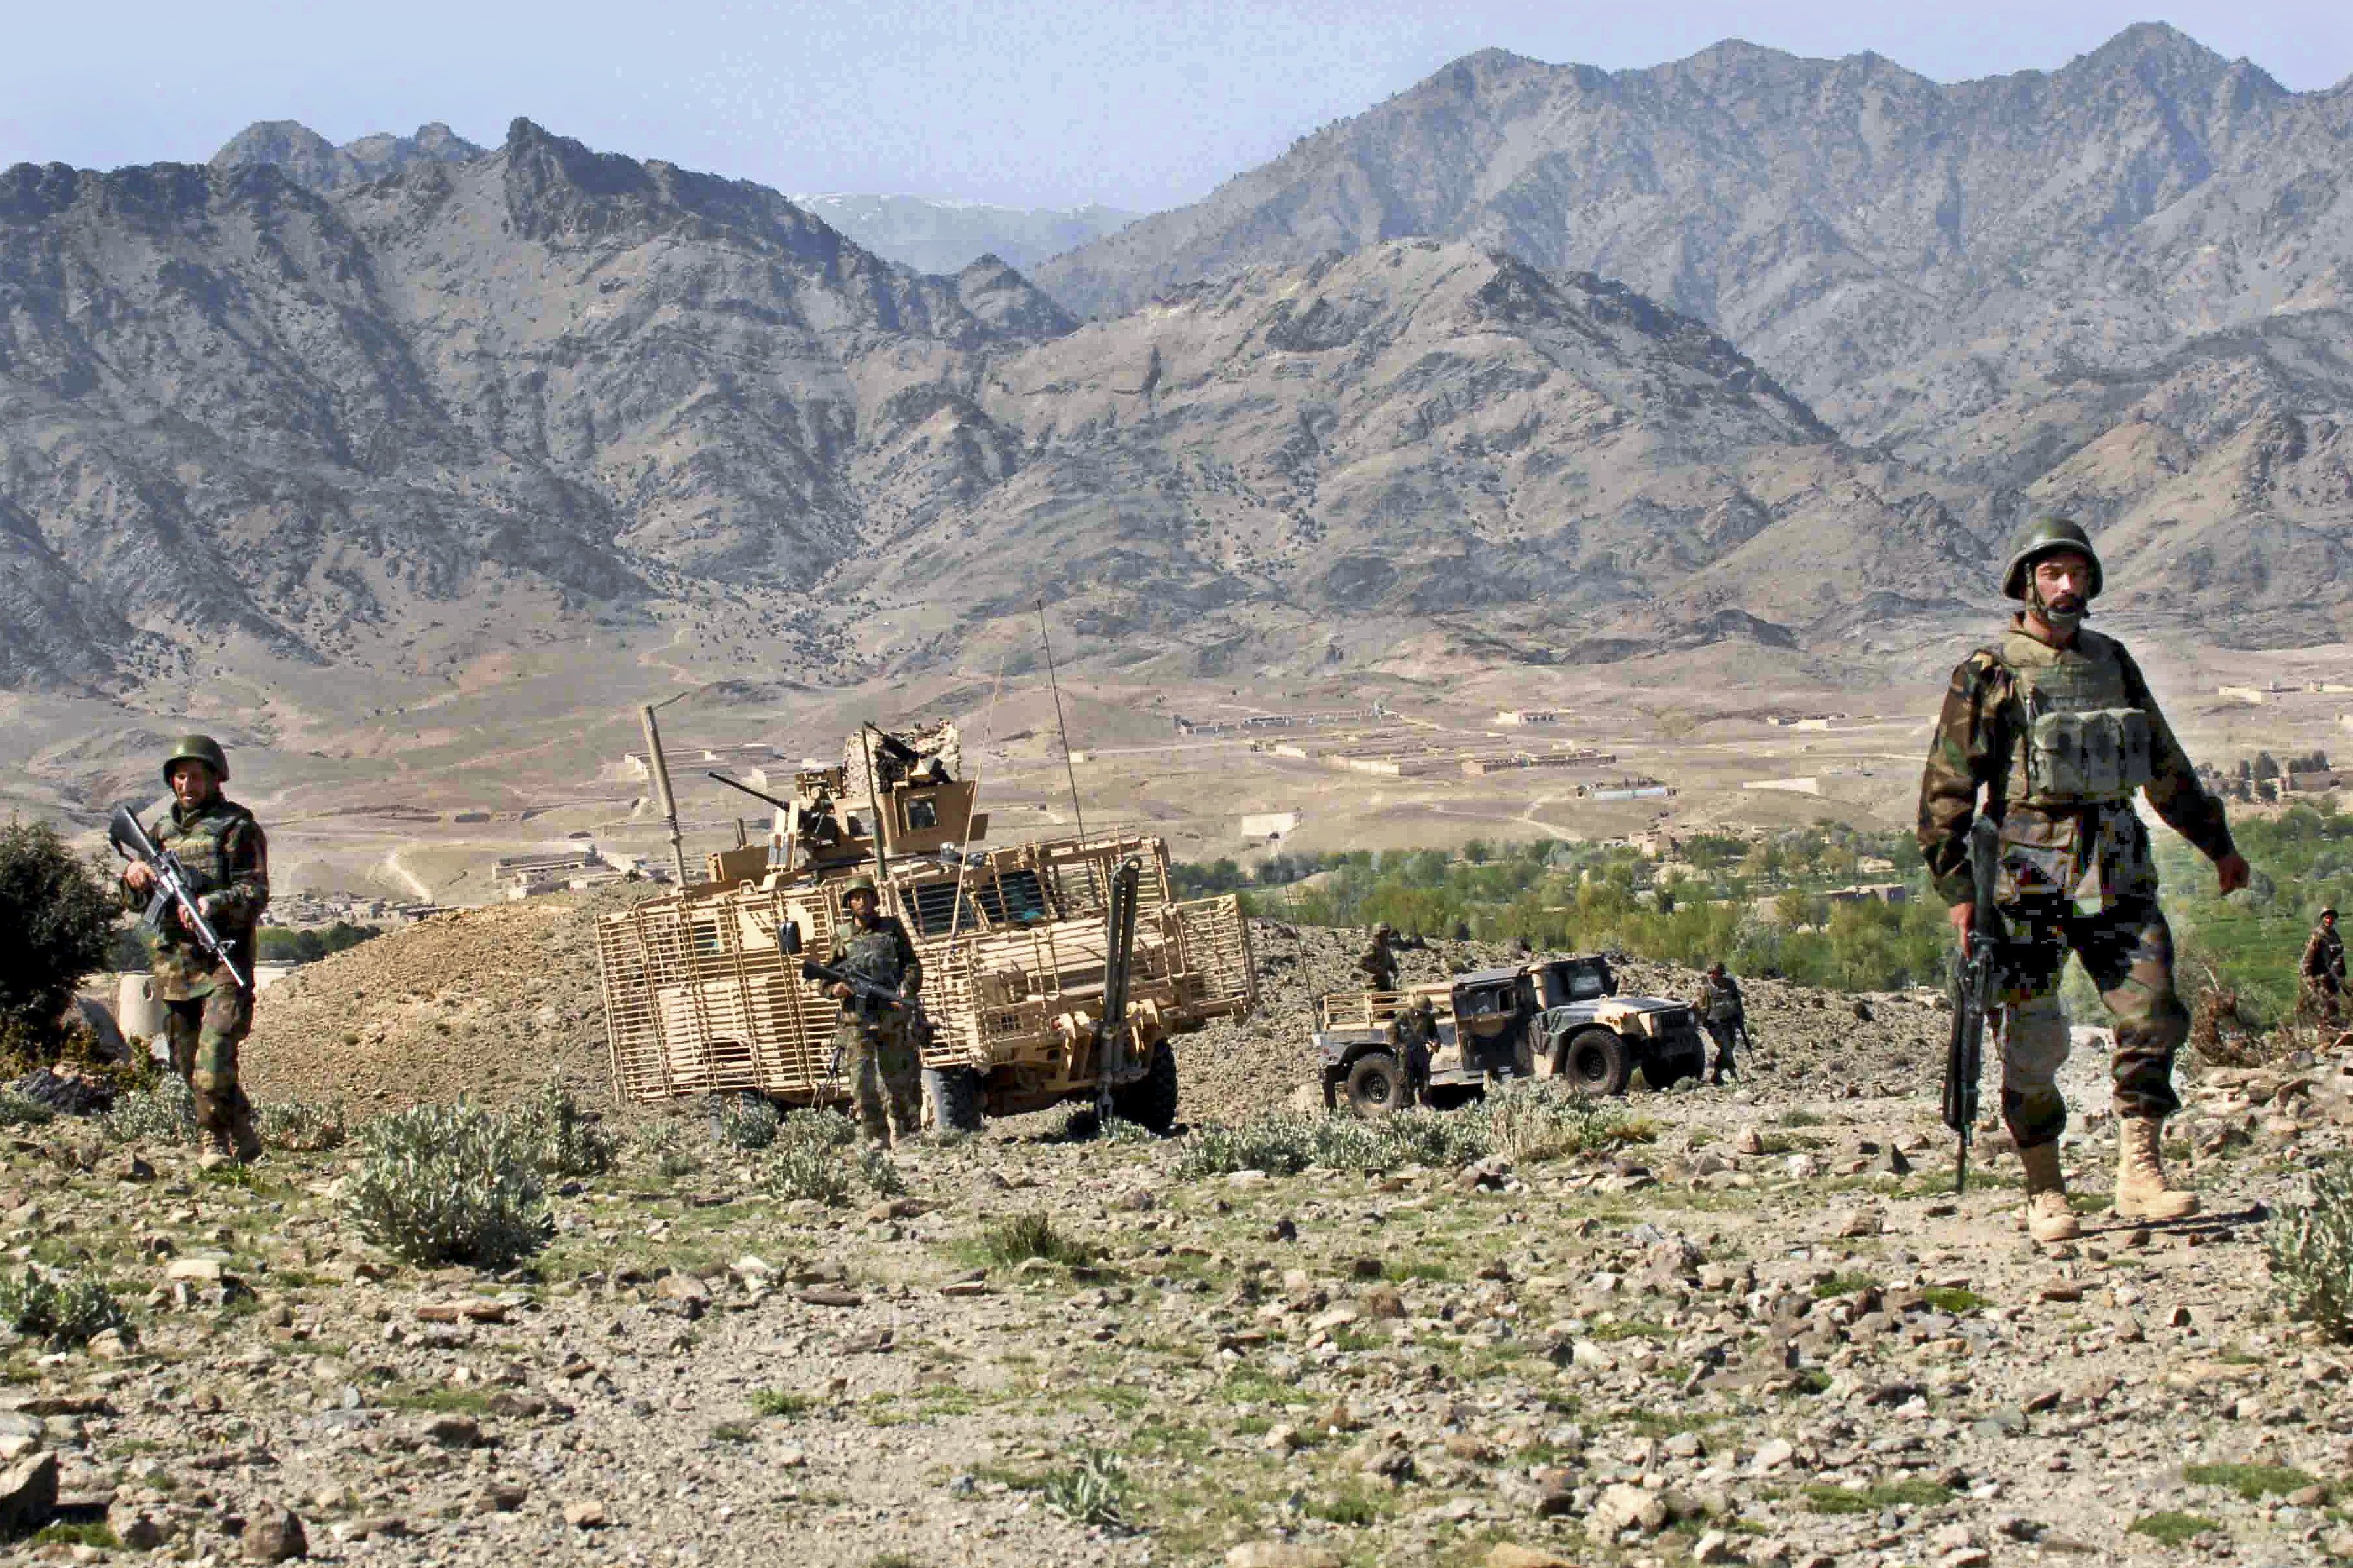 File:Flickr - The U.S. Army - Afghanistan mountain.jpg - Wikimedia Commons